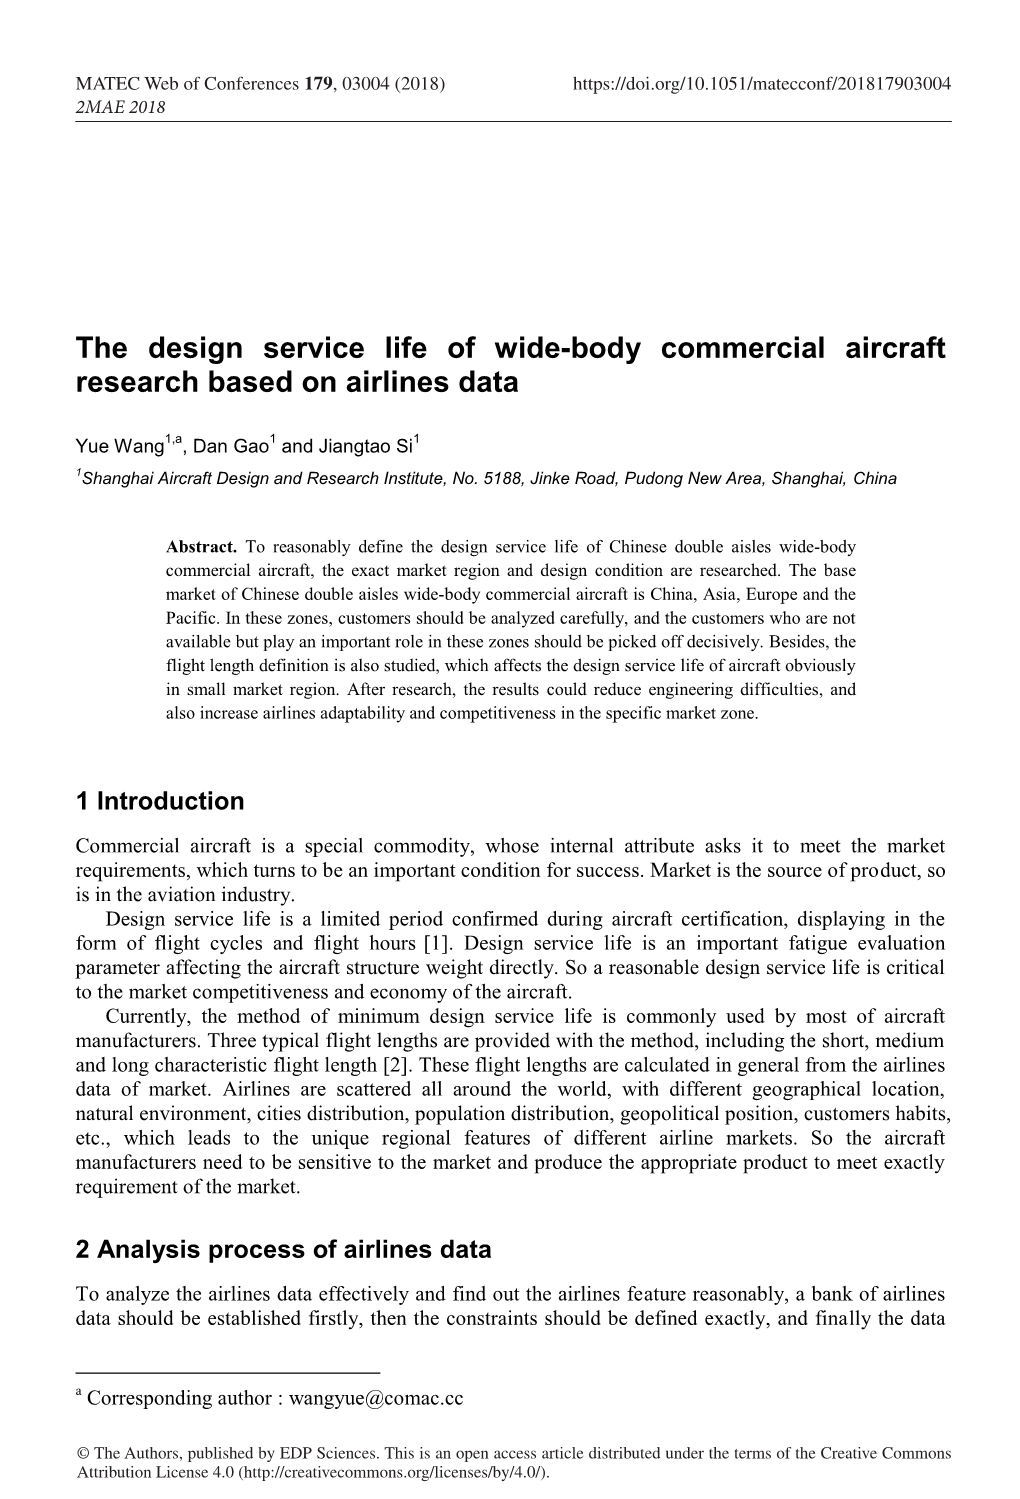 The Design Service Life of Wide-Body Commercial Aircraft Research Based on Airlines Data